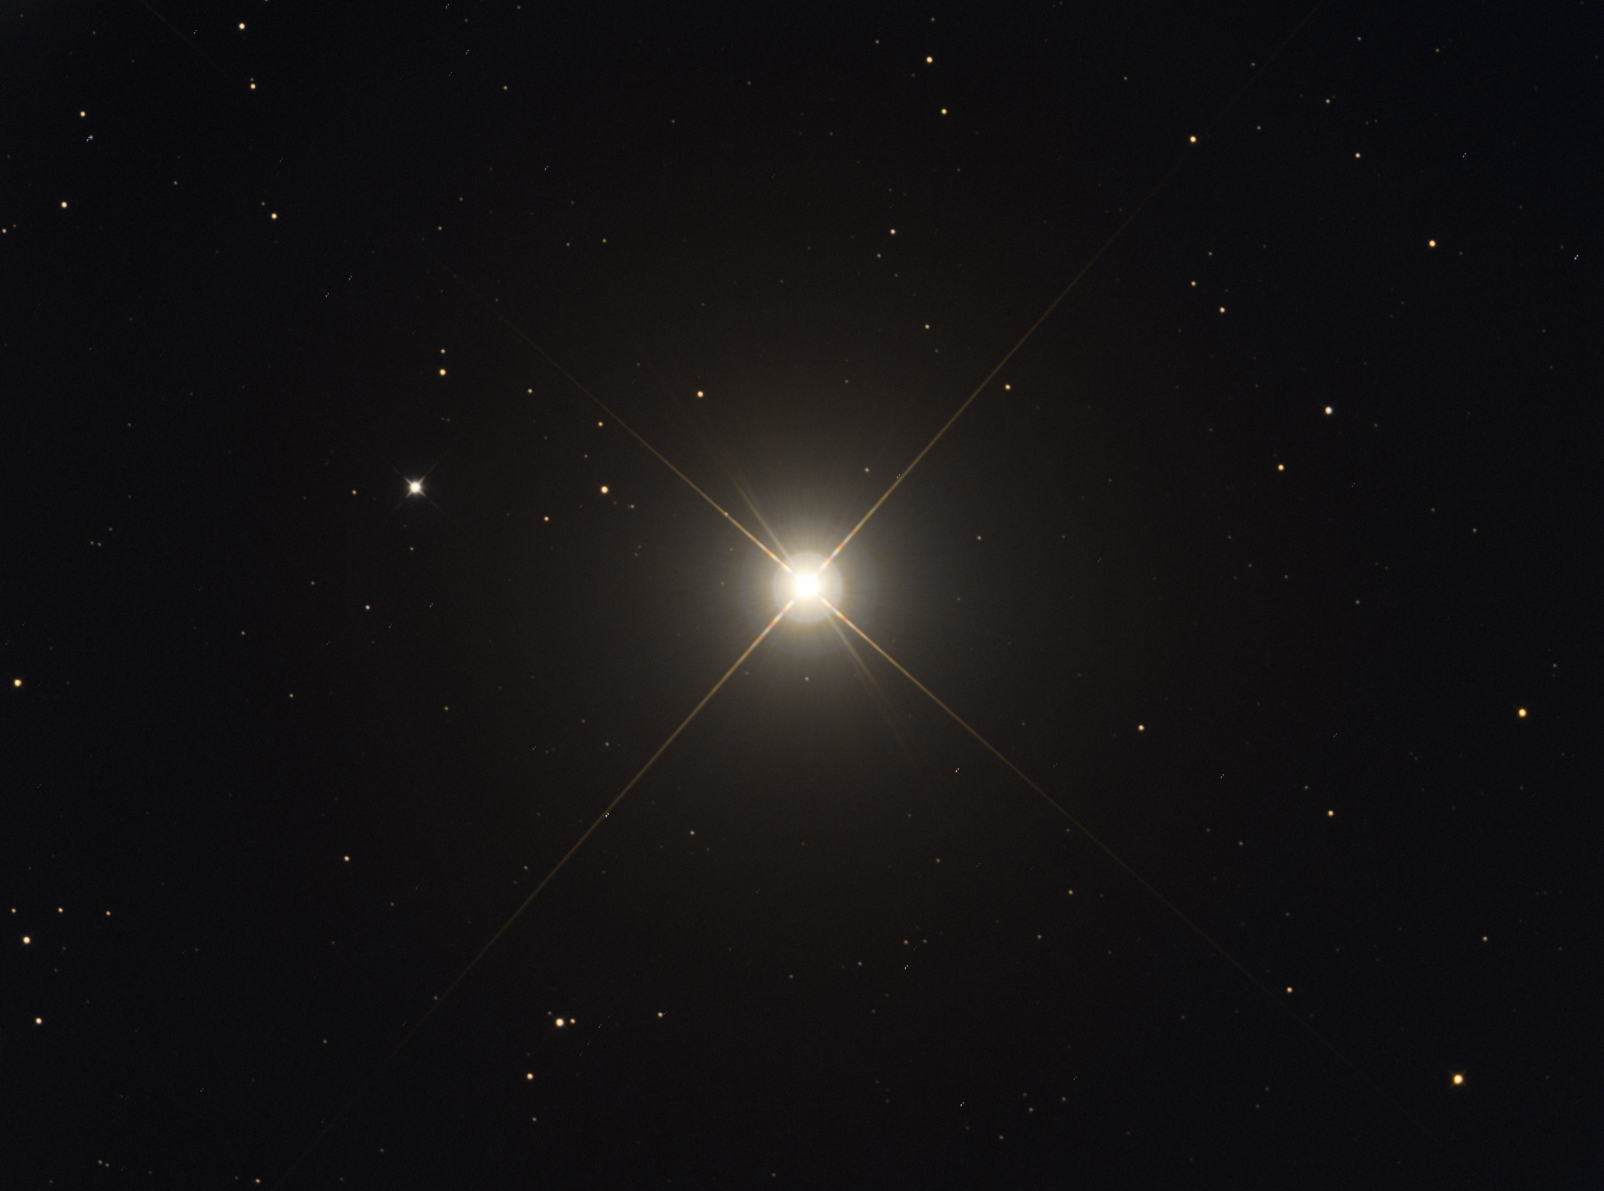 Sirius, the brightest star in the night sky. — The Astro Geeks